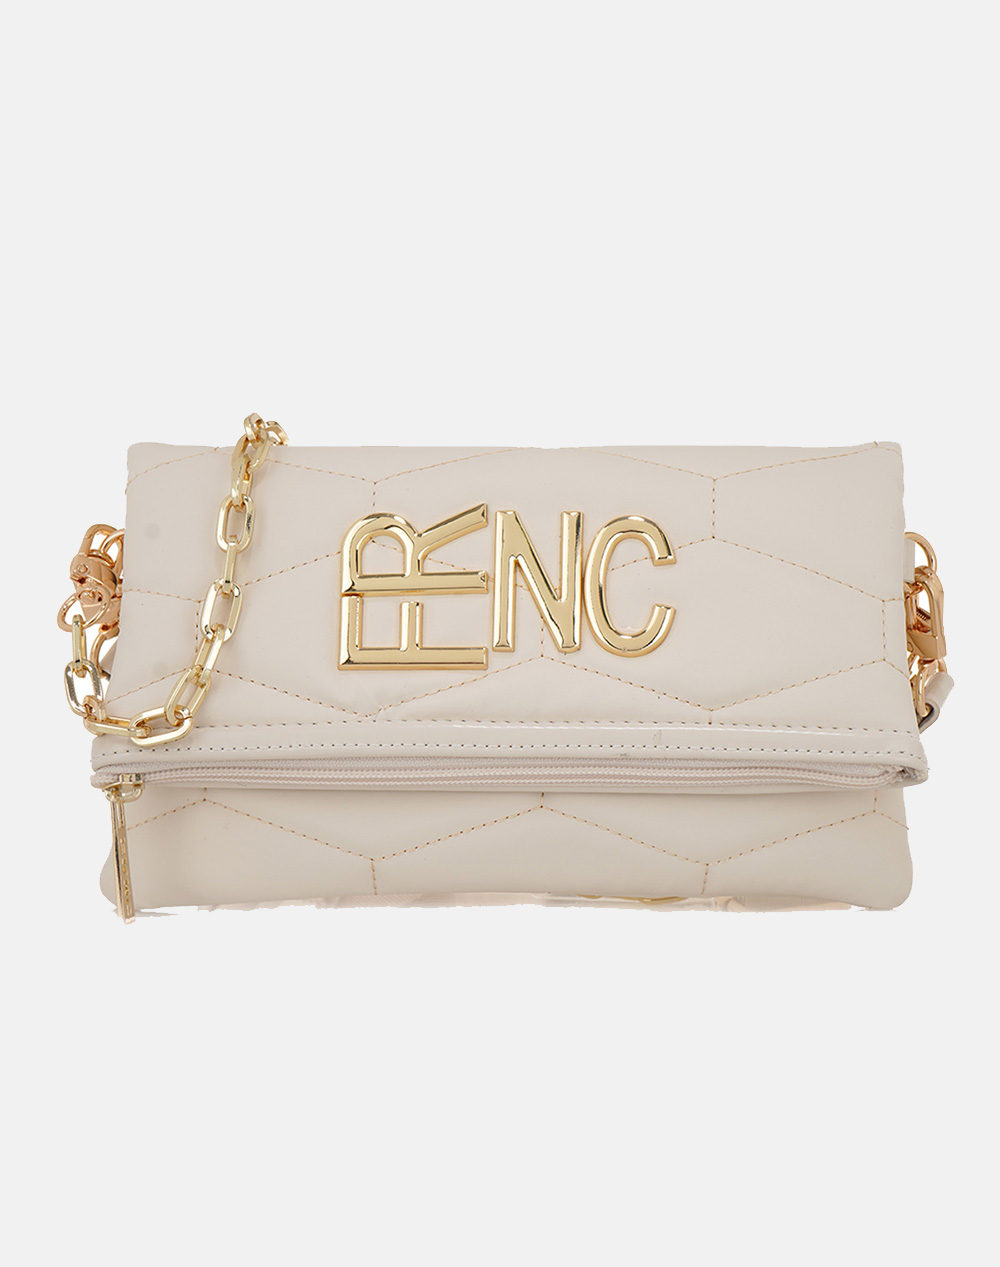 FRNC ΤΣΑΝΤΕΣ ΤΑΧΥΔΡΟΜΟΥ /CROSS BODY (Διαστάσεις: 25 x 14.5 x 5 εκ) S618R920907S-07S Ivory